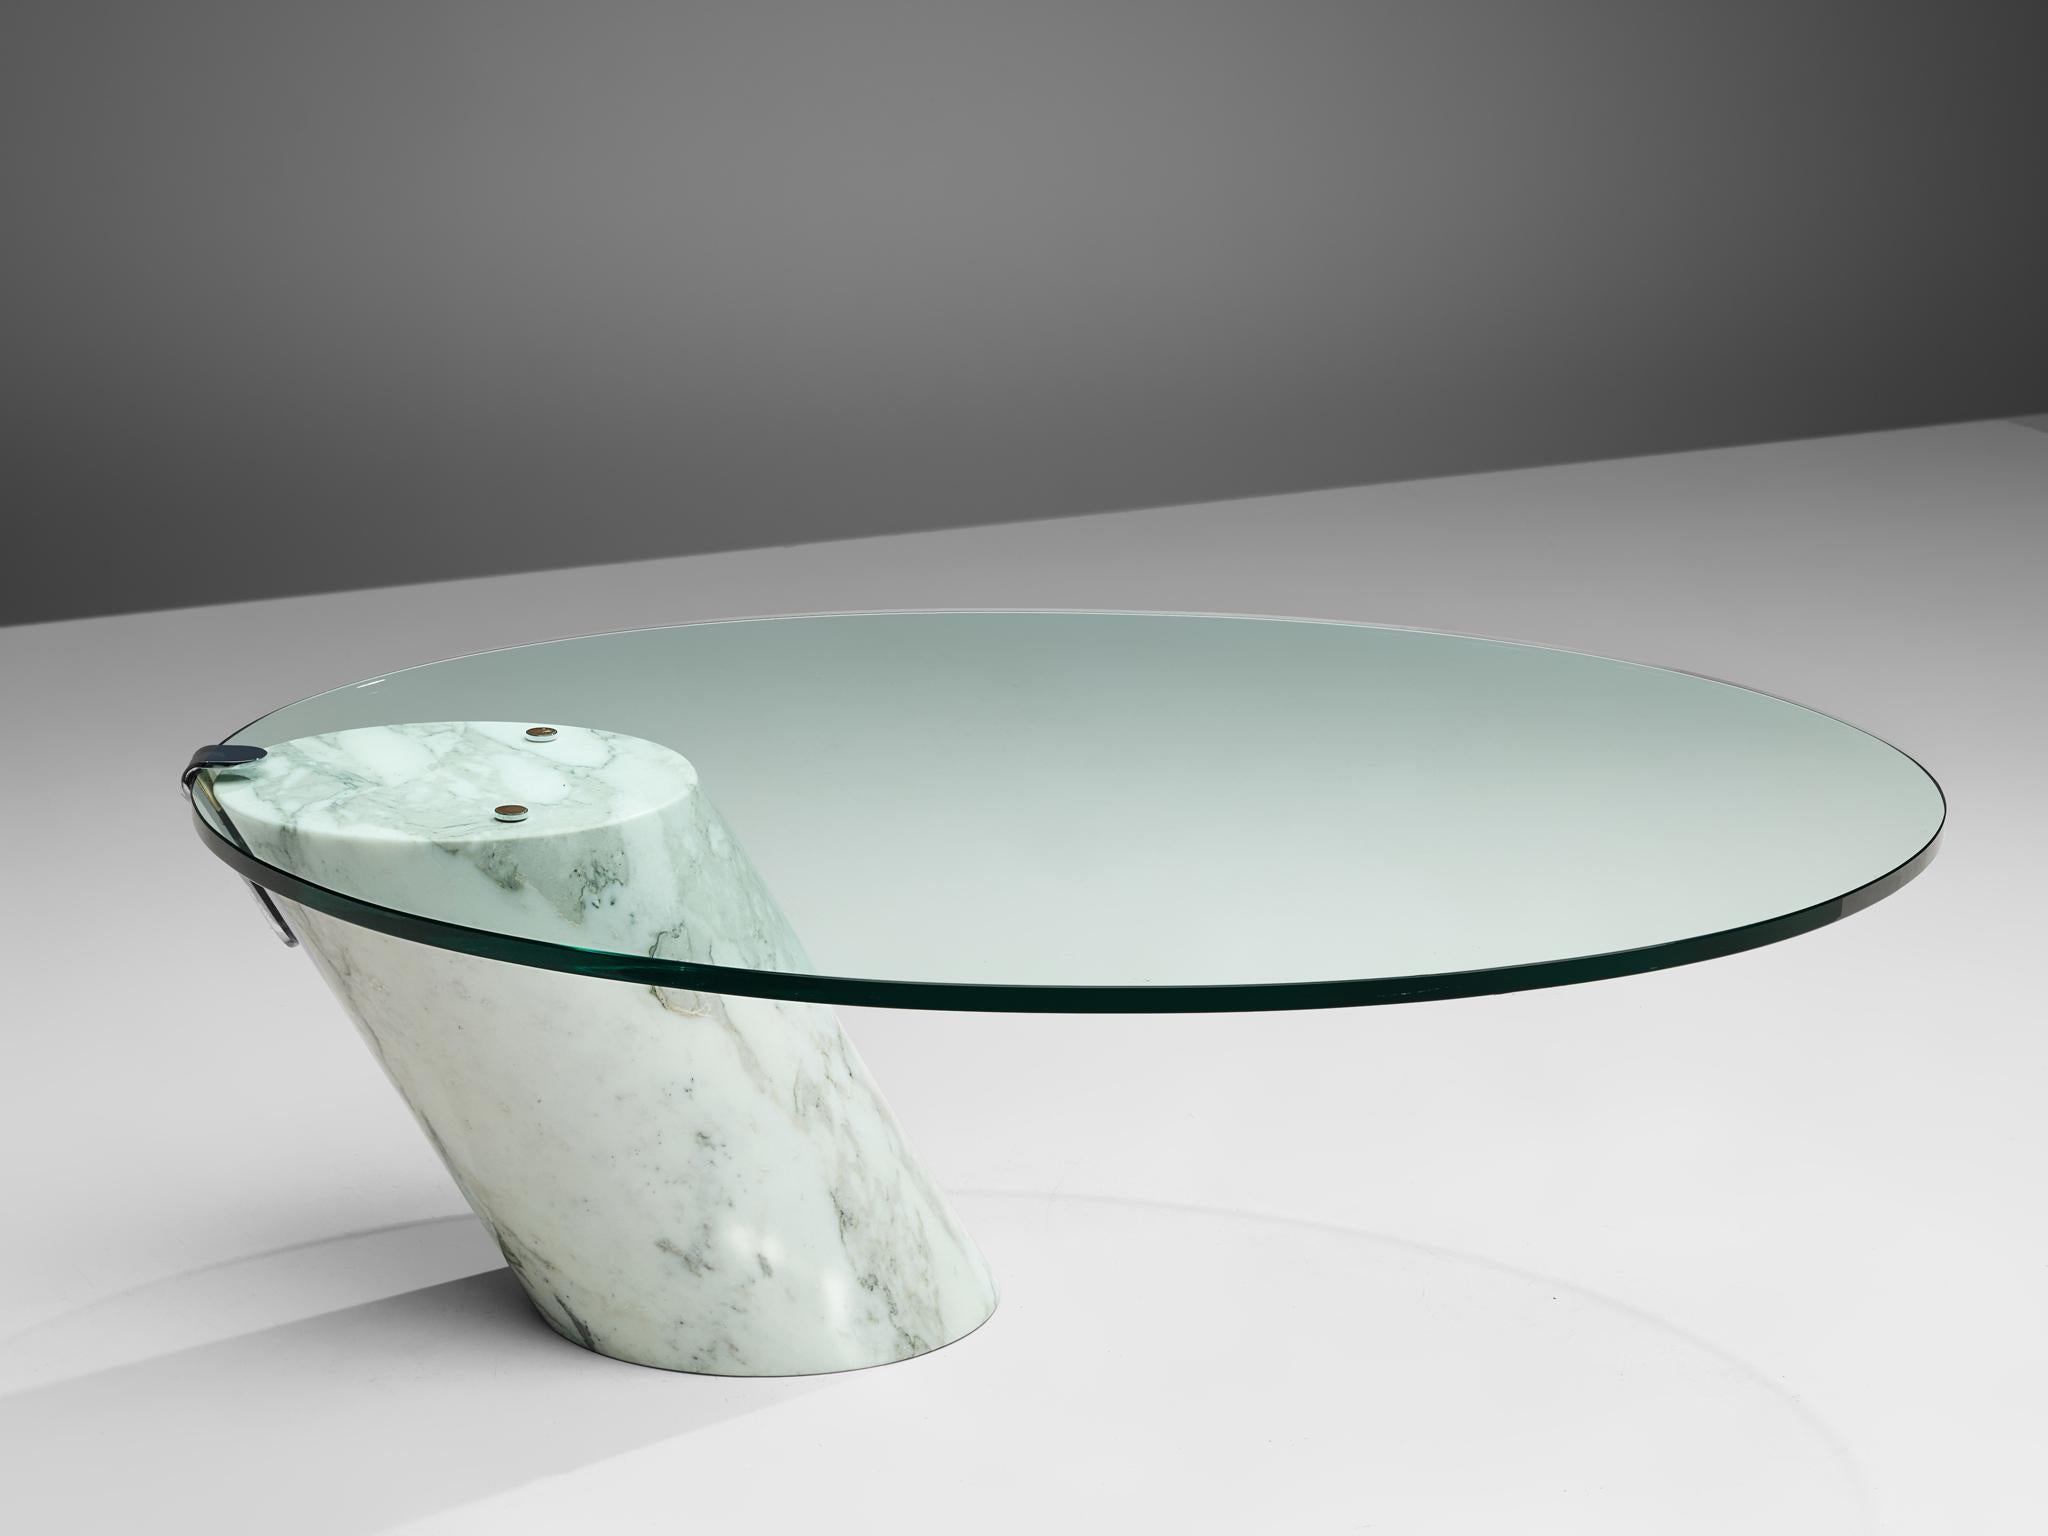 Team Form AG for Ronald Schmitt, coffee table model 'K1000', marble and glass, Switzerland, circa 1974. 

This cocktail table is made of a solid Carrara marble base with a clear glass top. The oval top is attached to the skewed cylindrical base,